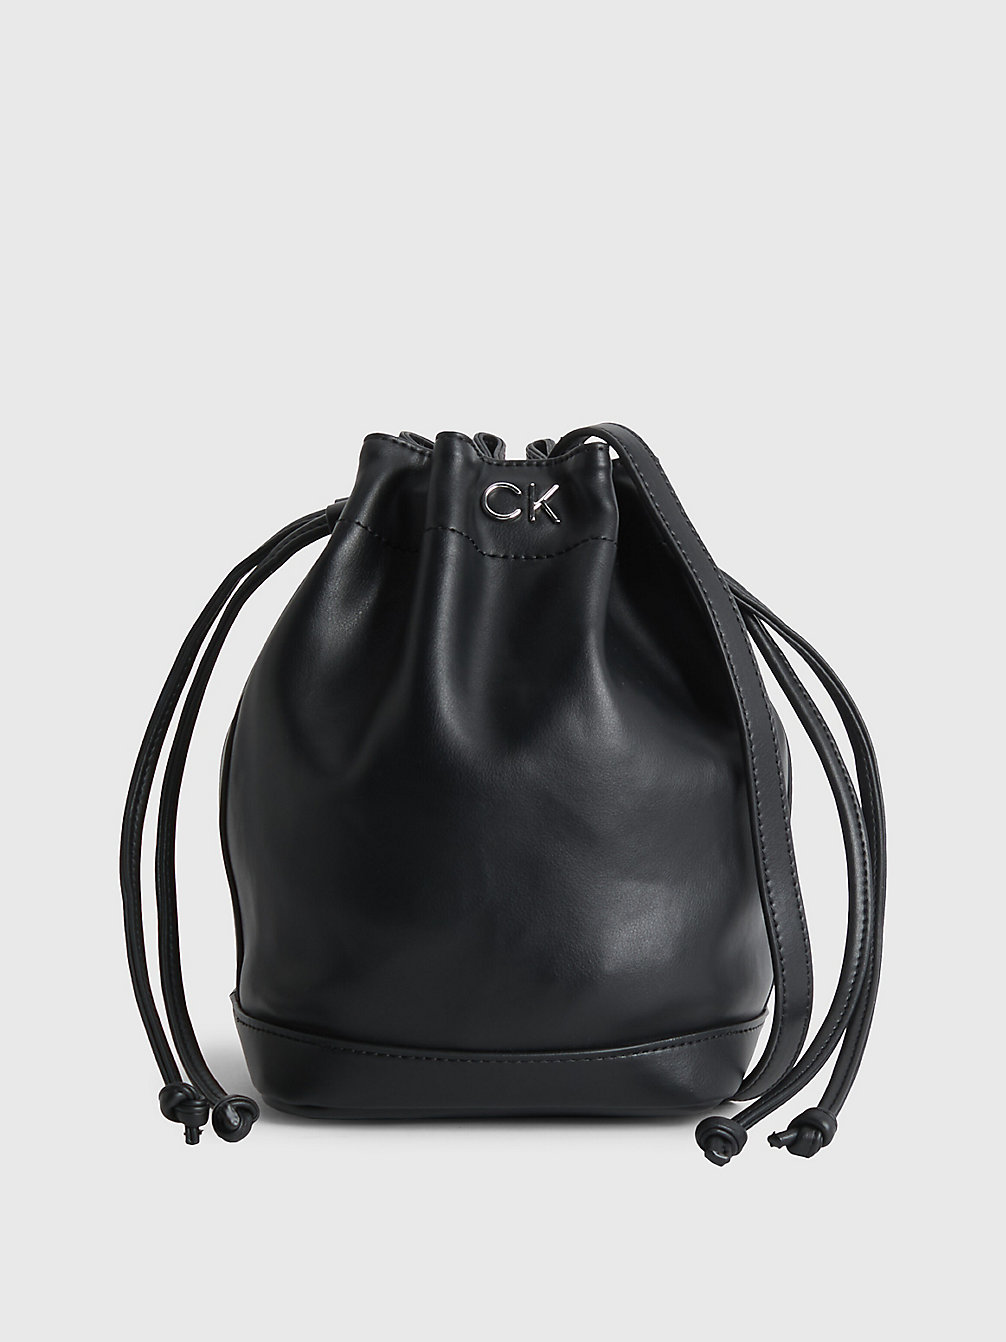 CK BLACK Small Recycled Bucket Bag undefined women Calvin Klein